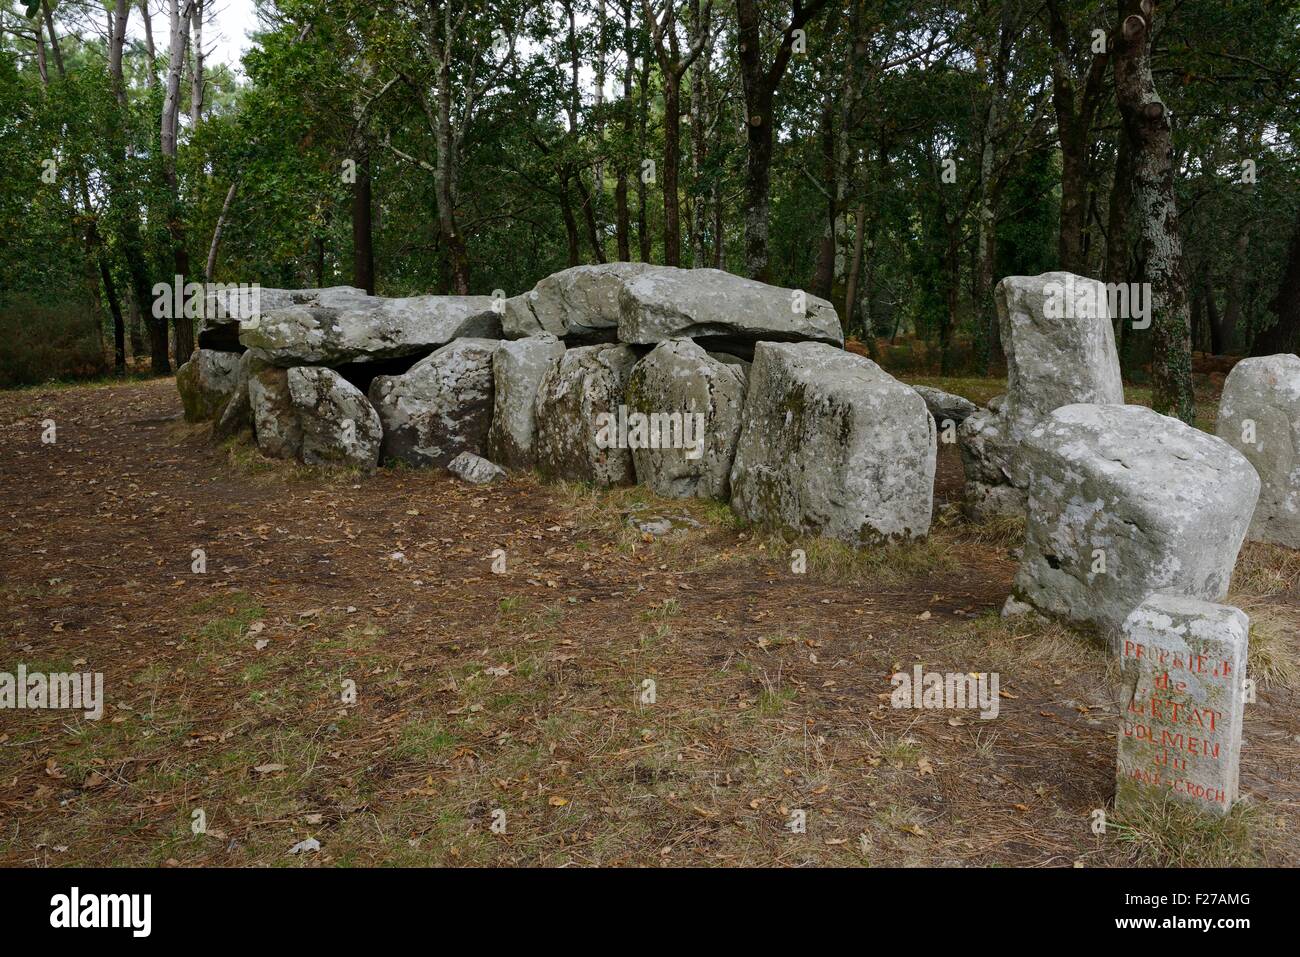 The Neolithic prehistoric dolmen burial chamber of Mane Groh near village of Crucuno, Brittany, France. aka Grah, Croch, Gros Stock Photo